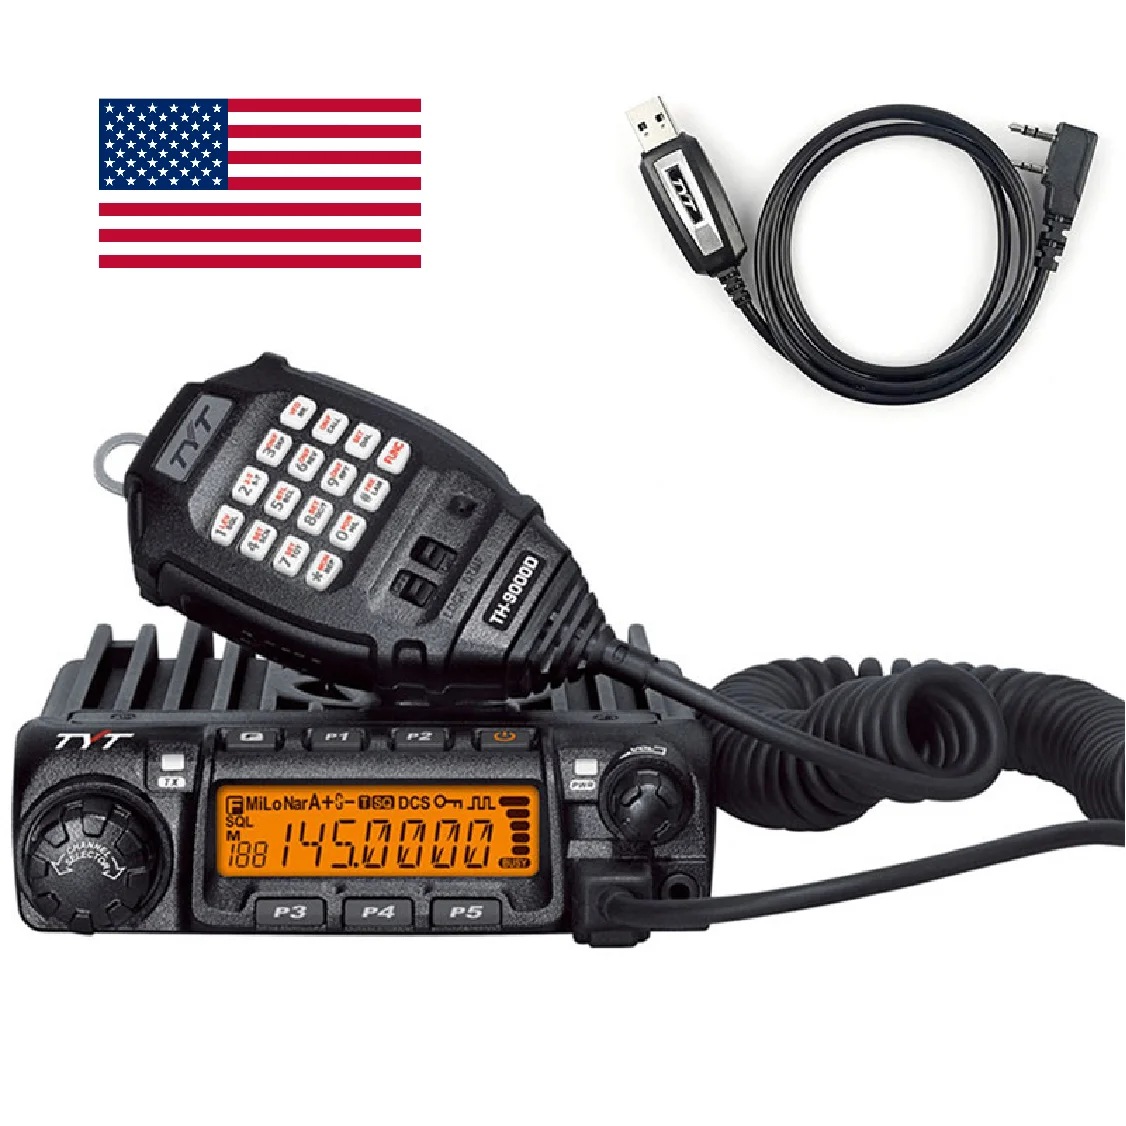 

TYT TH-9000D PLUS Single/Mono Band 50W Car Mobile Transceiver 136-174/220-260/400-490MHz Two Way Radio w/ Cable